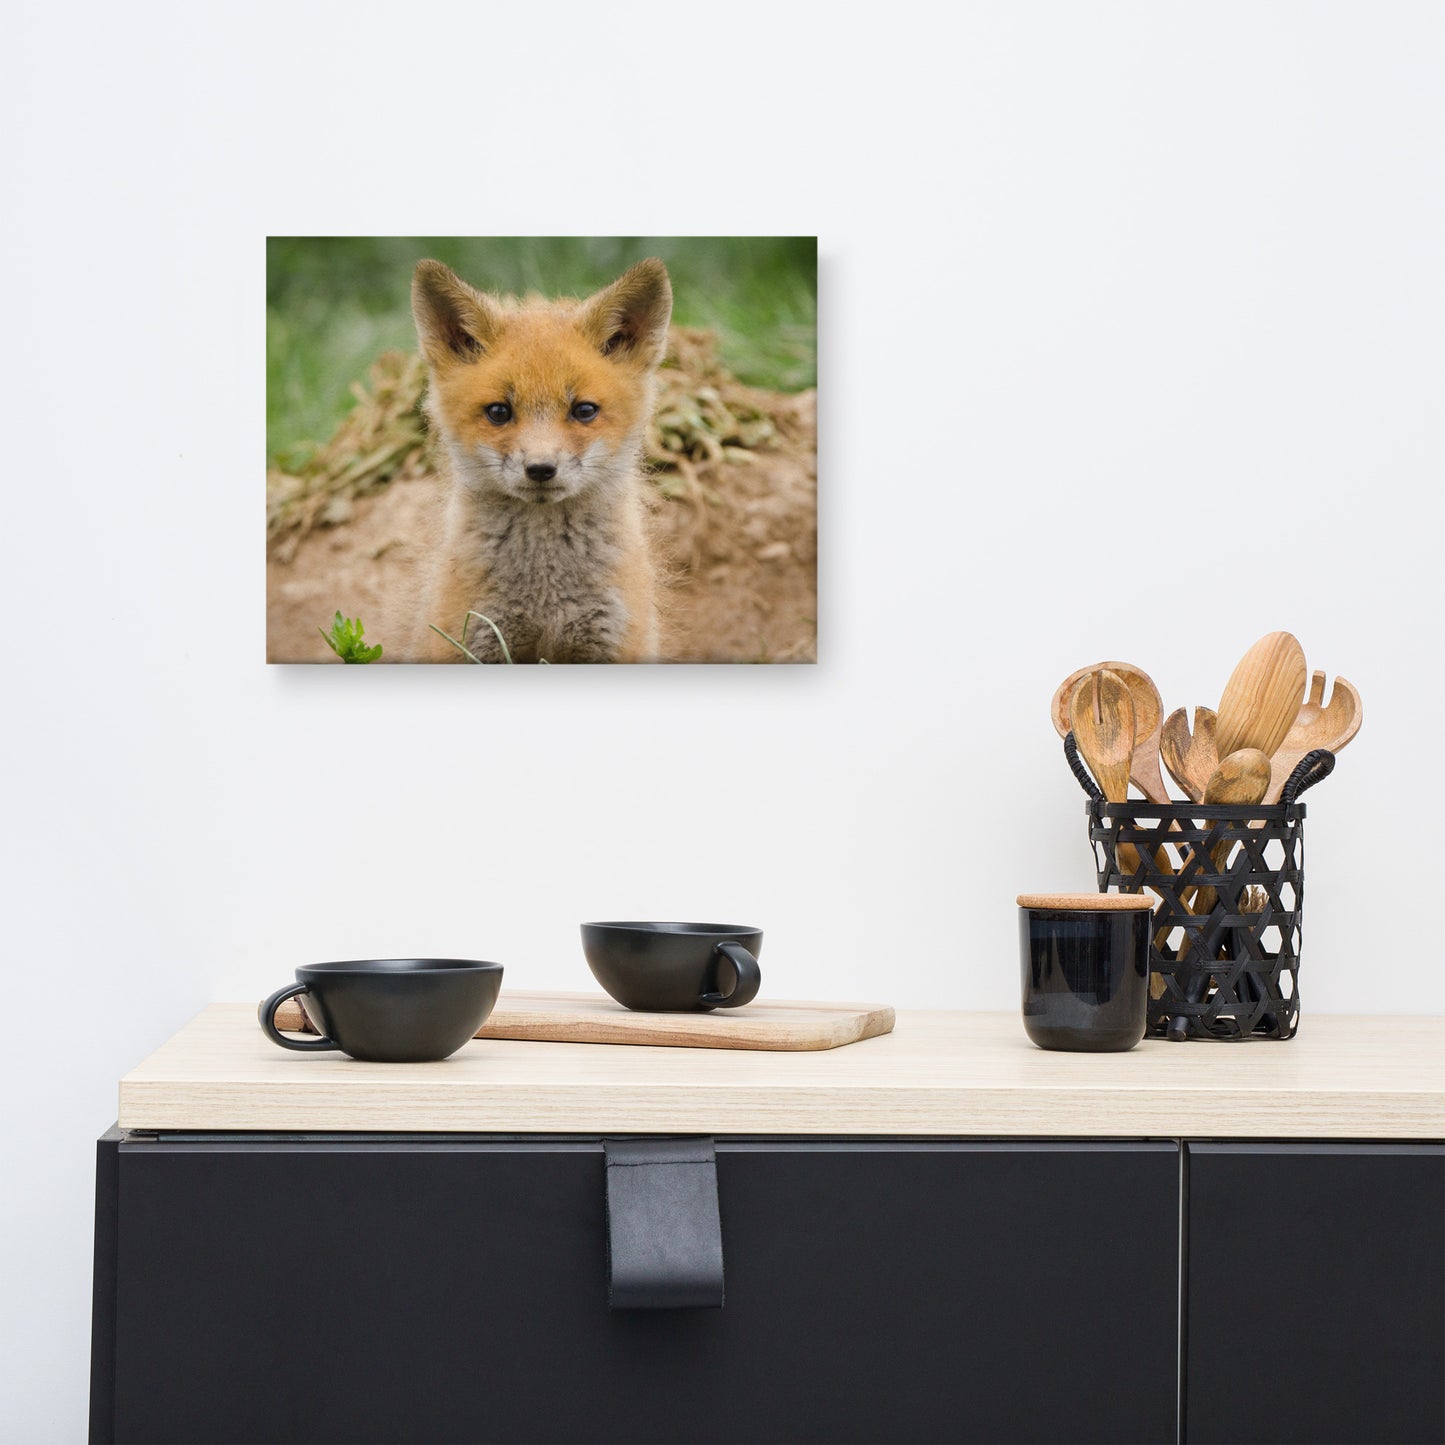 Modern Wall Art Dining Room: Young Red Fox Kit Popping Out of Den- Wildlife / Animal / Nature Photograph Canvas Wall Art Print - Artwork